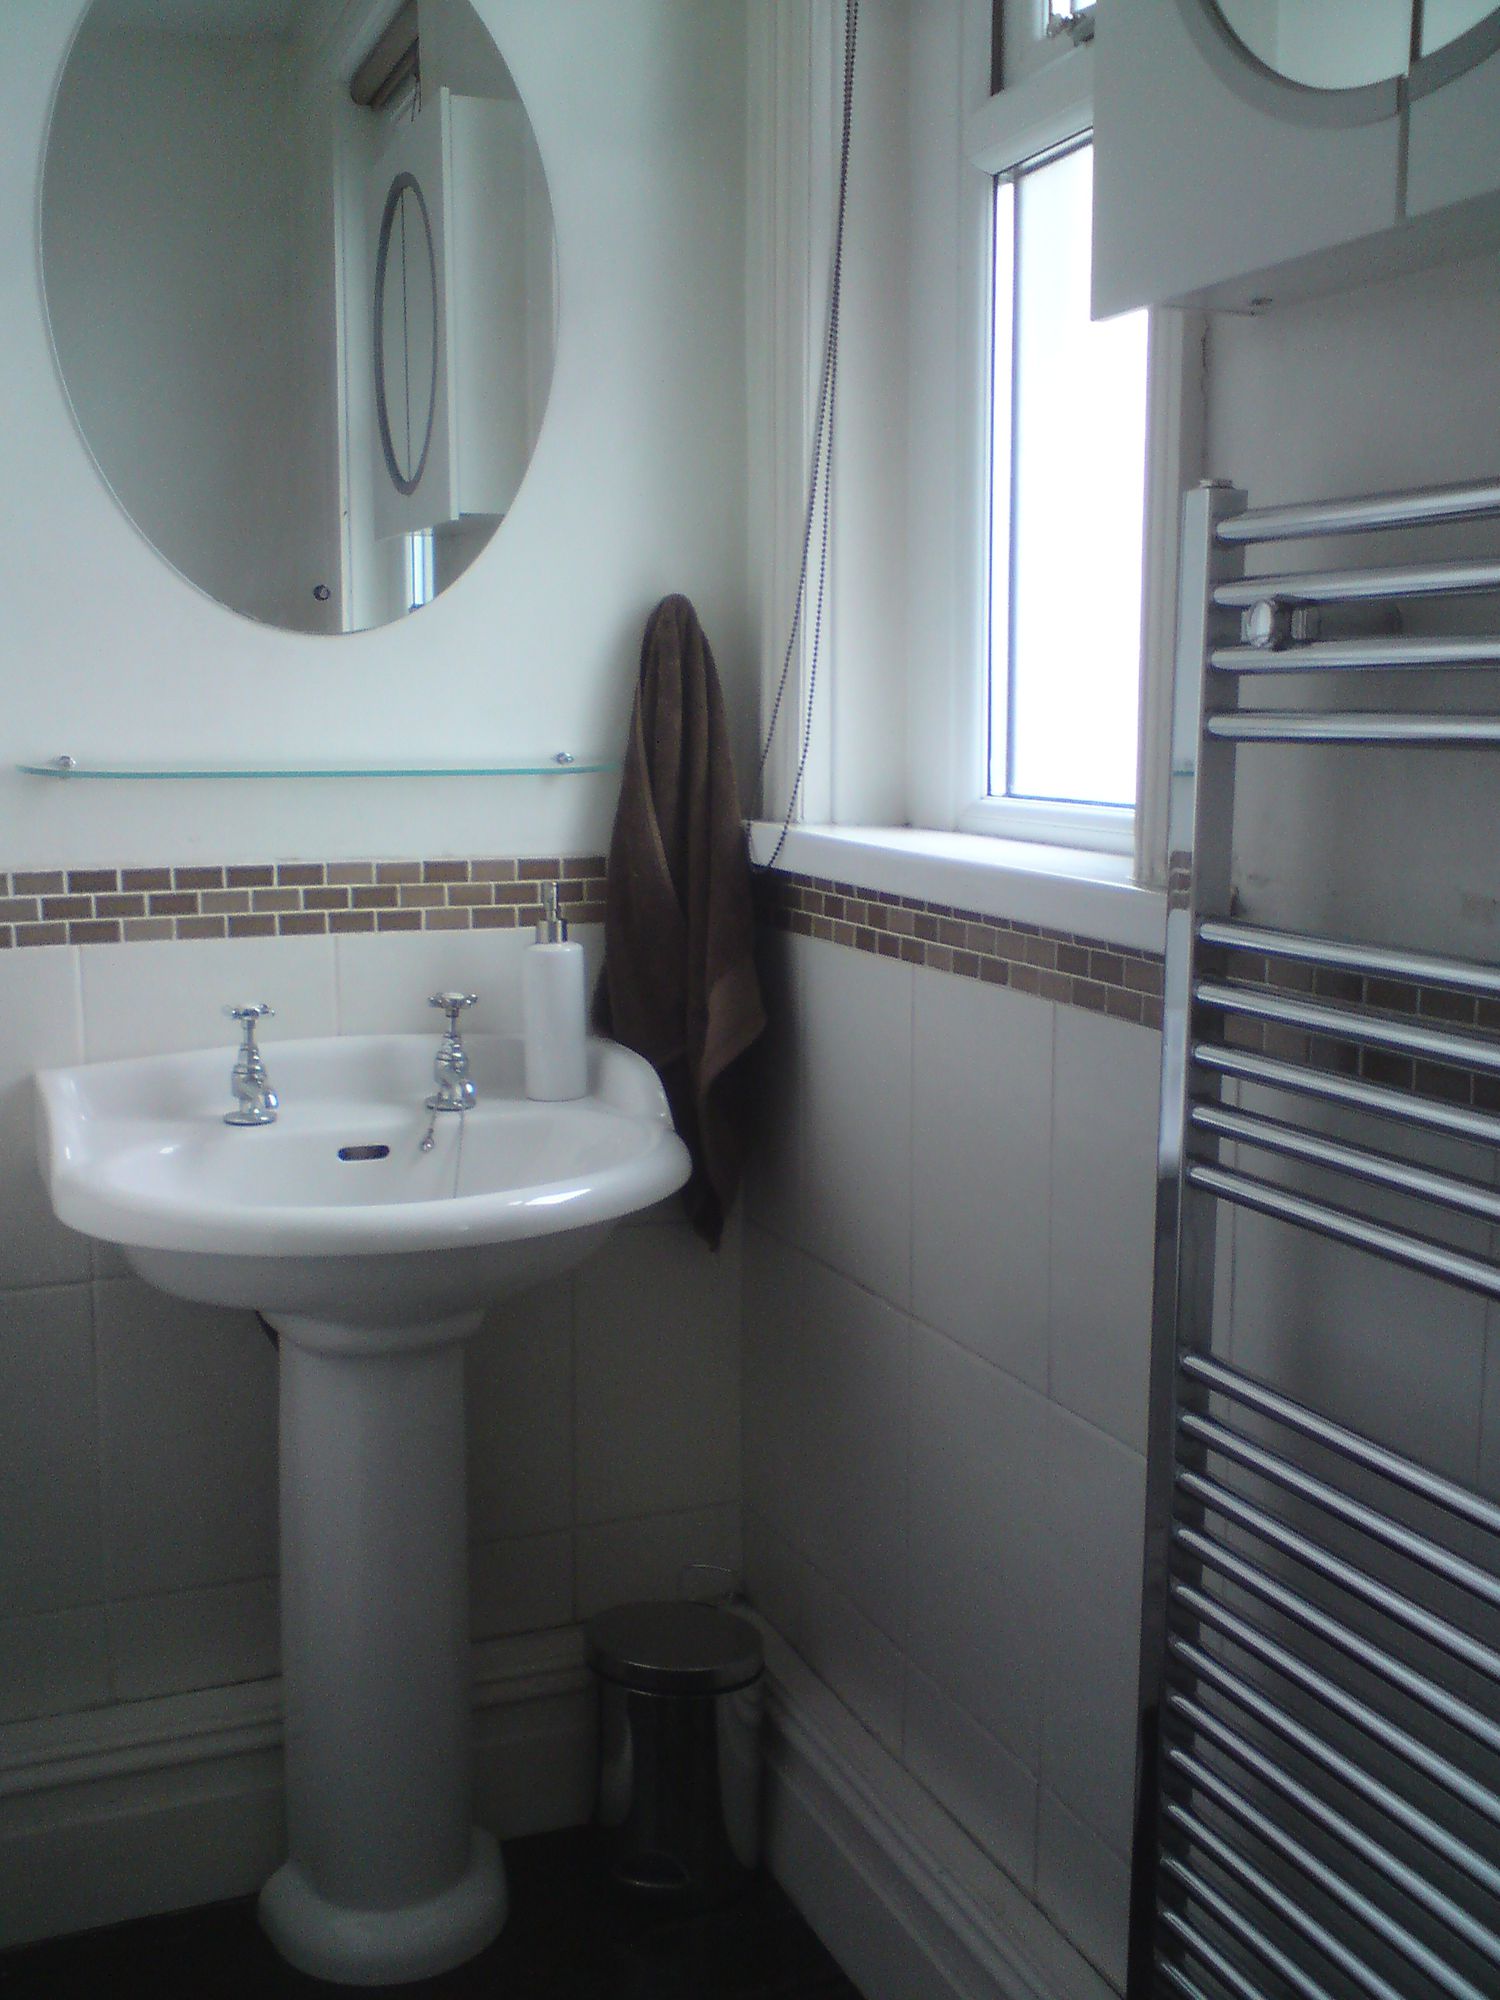 A photo of the old sink area which had a single pedestal sink with the chrome towel radiator to the side.